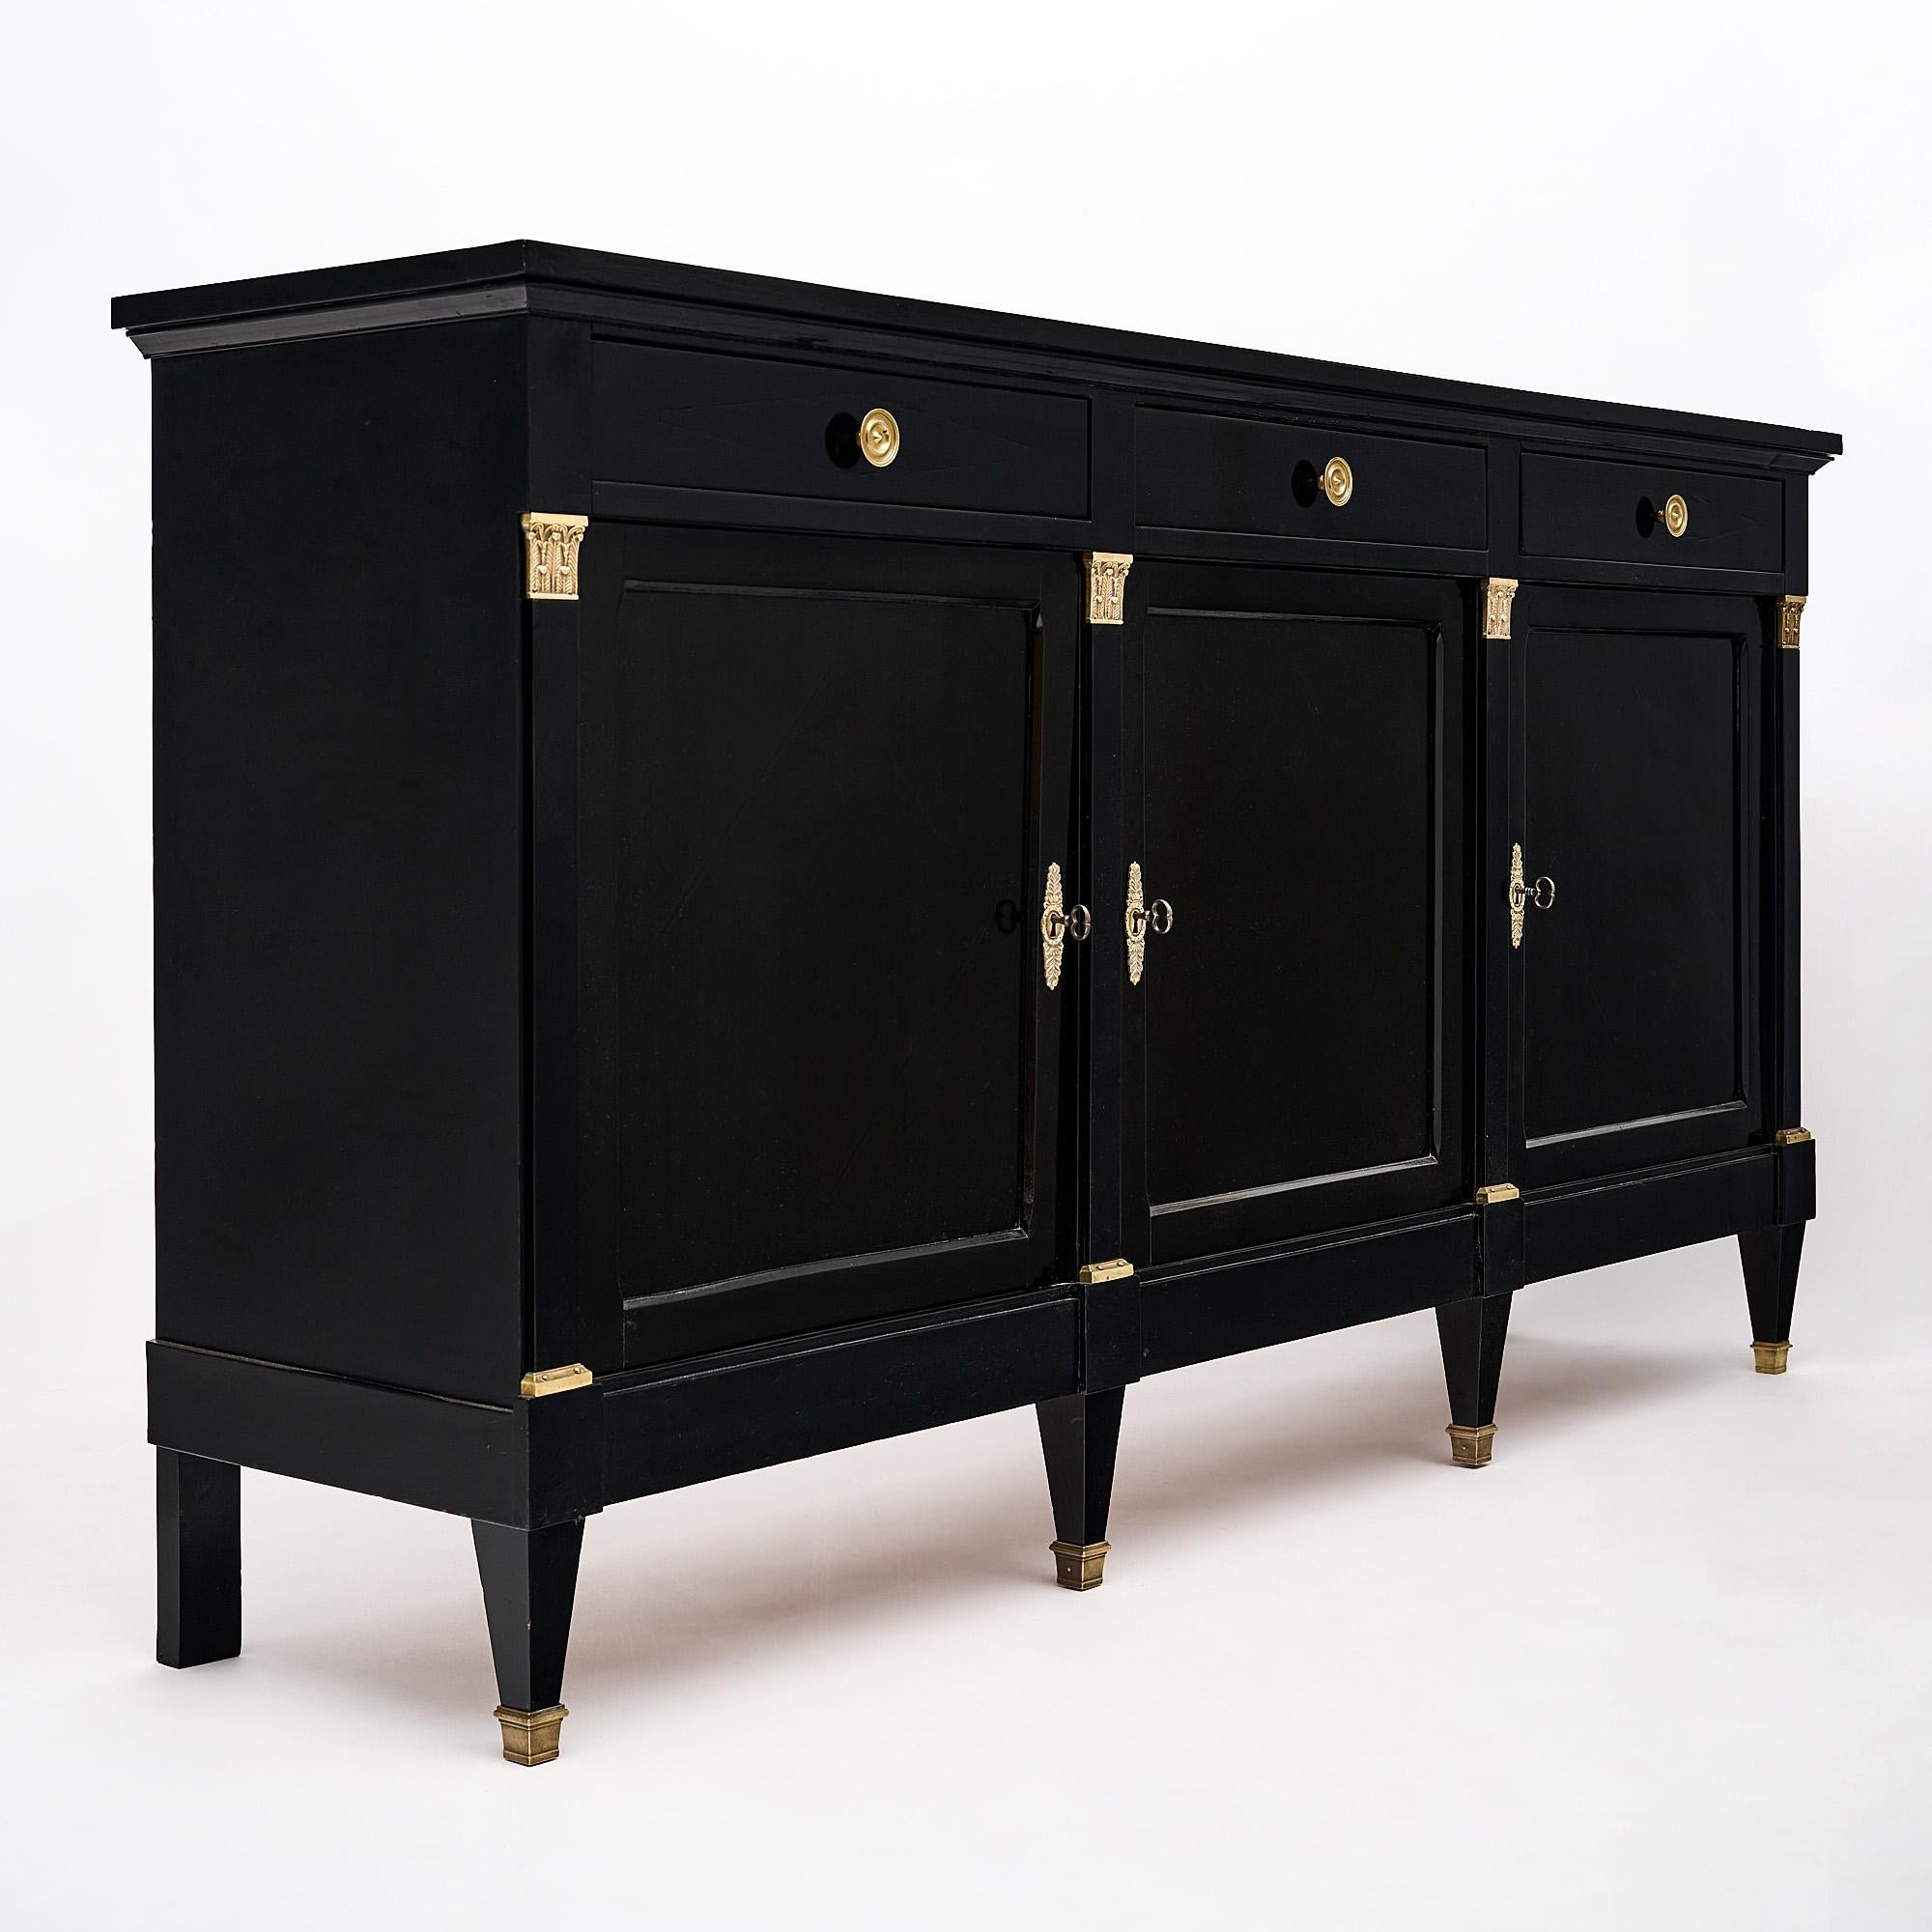 Buffet, French, in the Directoire style made of mahogany that has been ebonized and finished in lustrous museum quality French polish. Three doors open to adjustable shelving, while three dovetailed drawers sit atop. The square tapered legs and